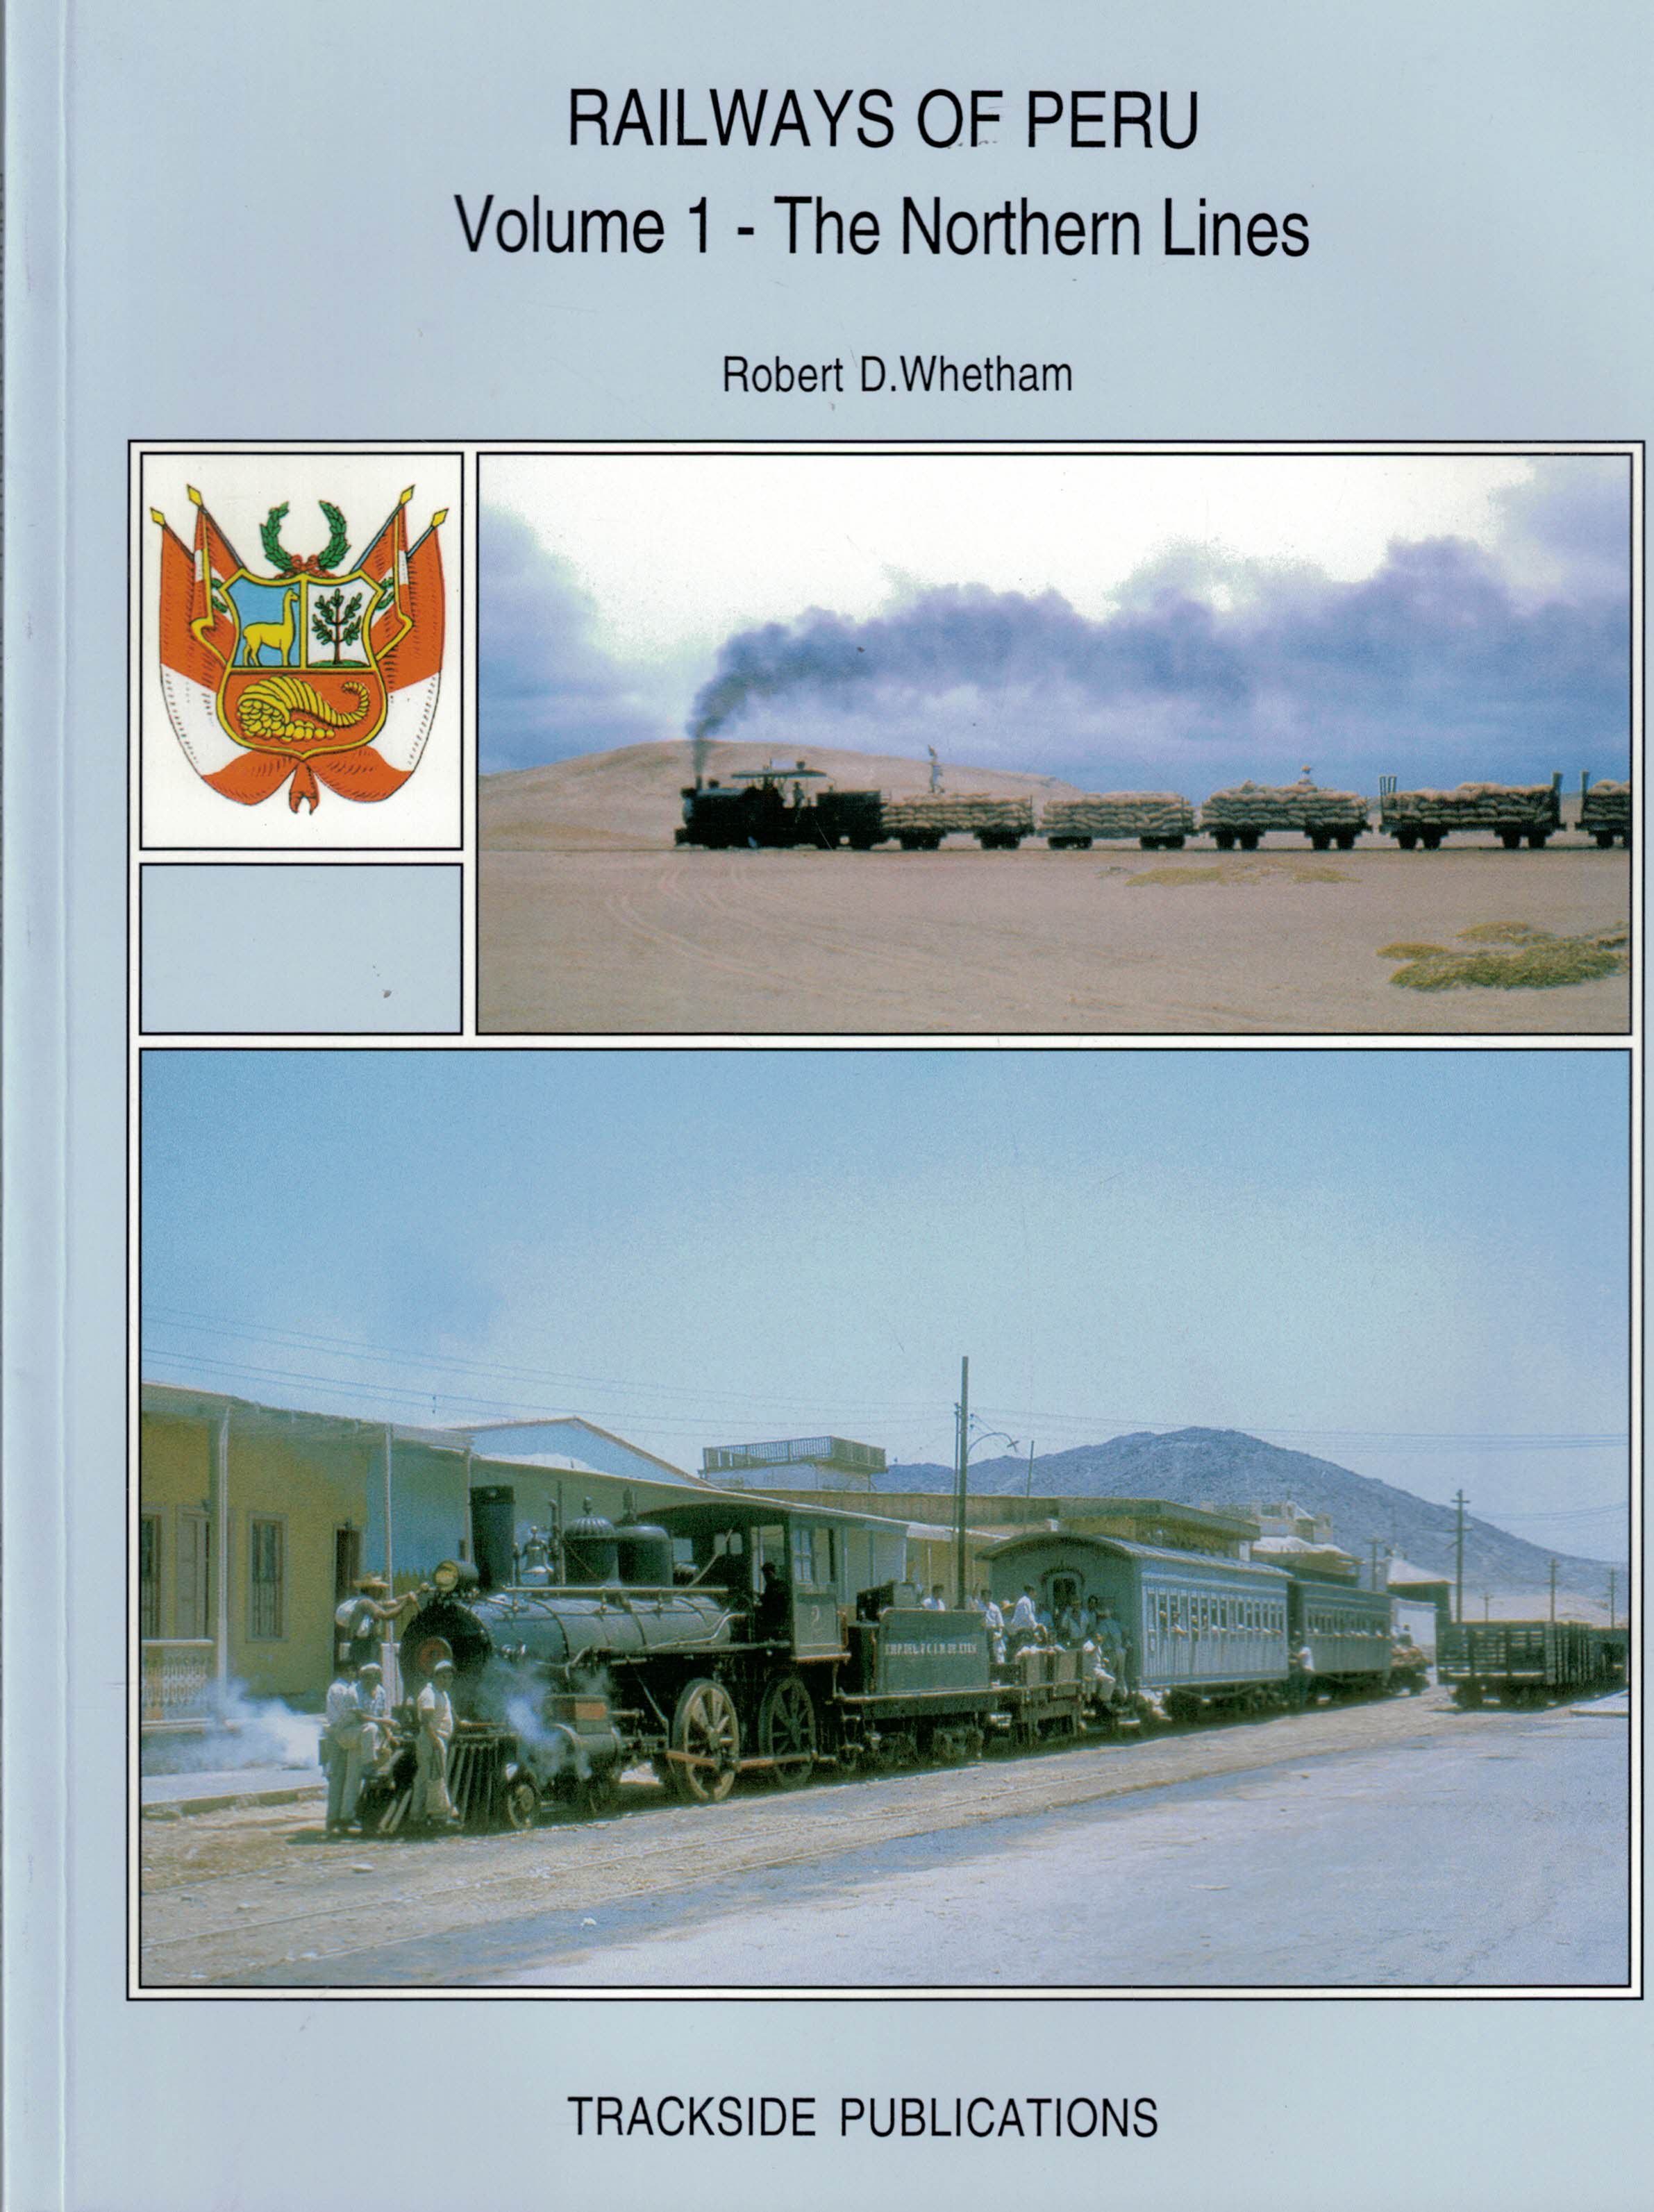 Railways of Peru. 2 volume set: The Northern Lines + The Central and Southern Lines.